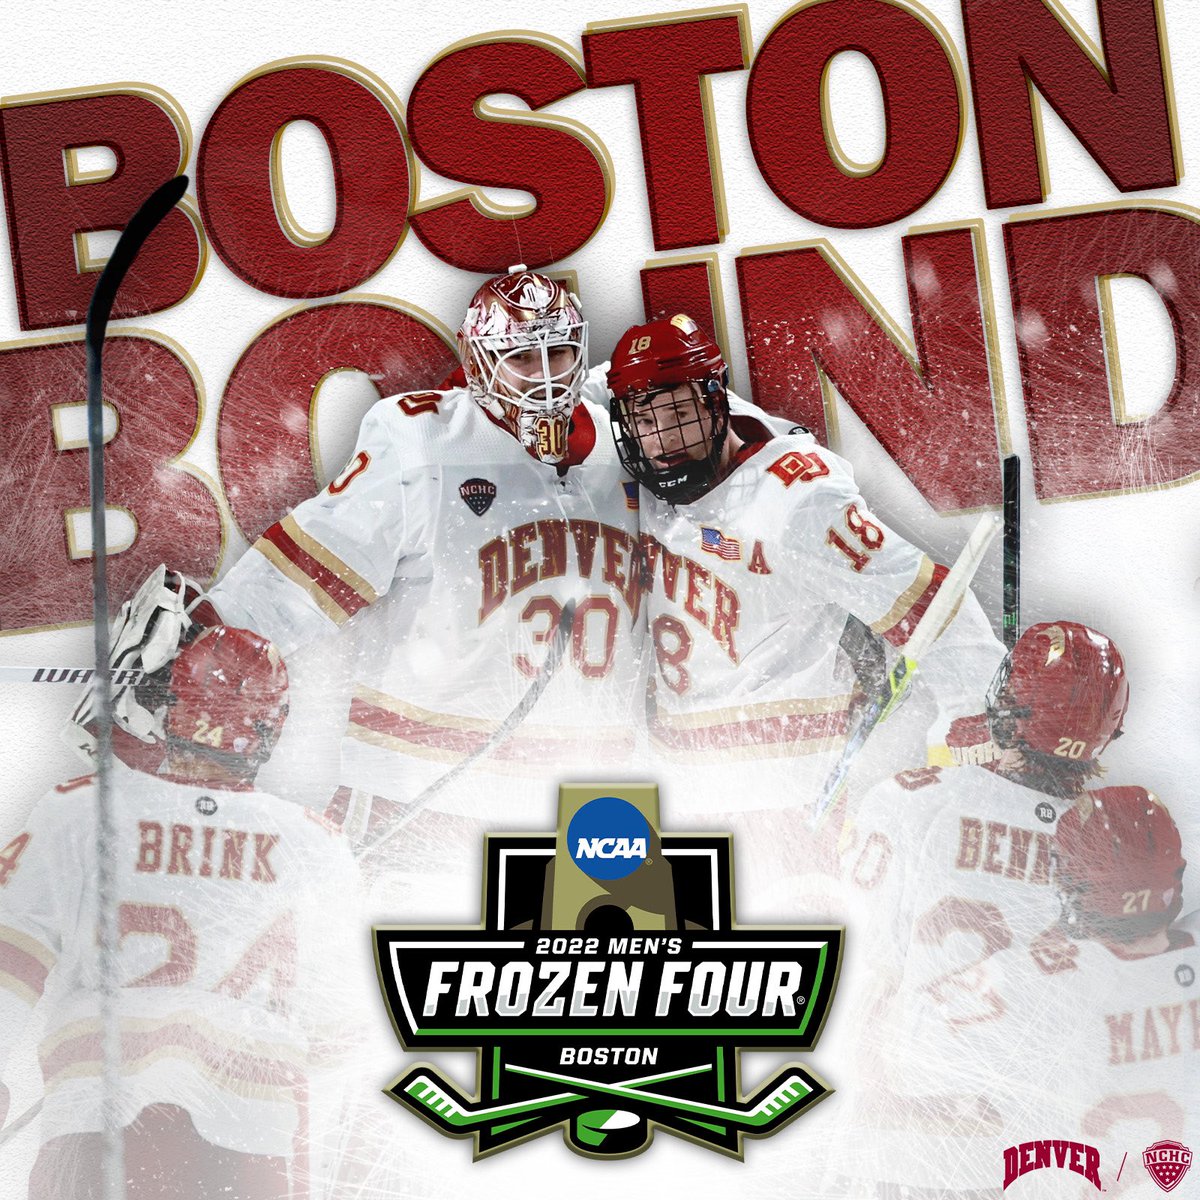 Shipping Up To Boston For The Frozen Four! #PioneerTogether